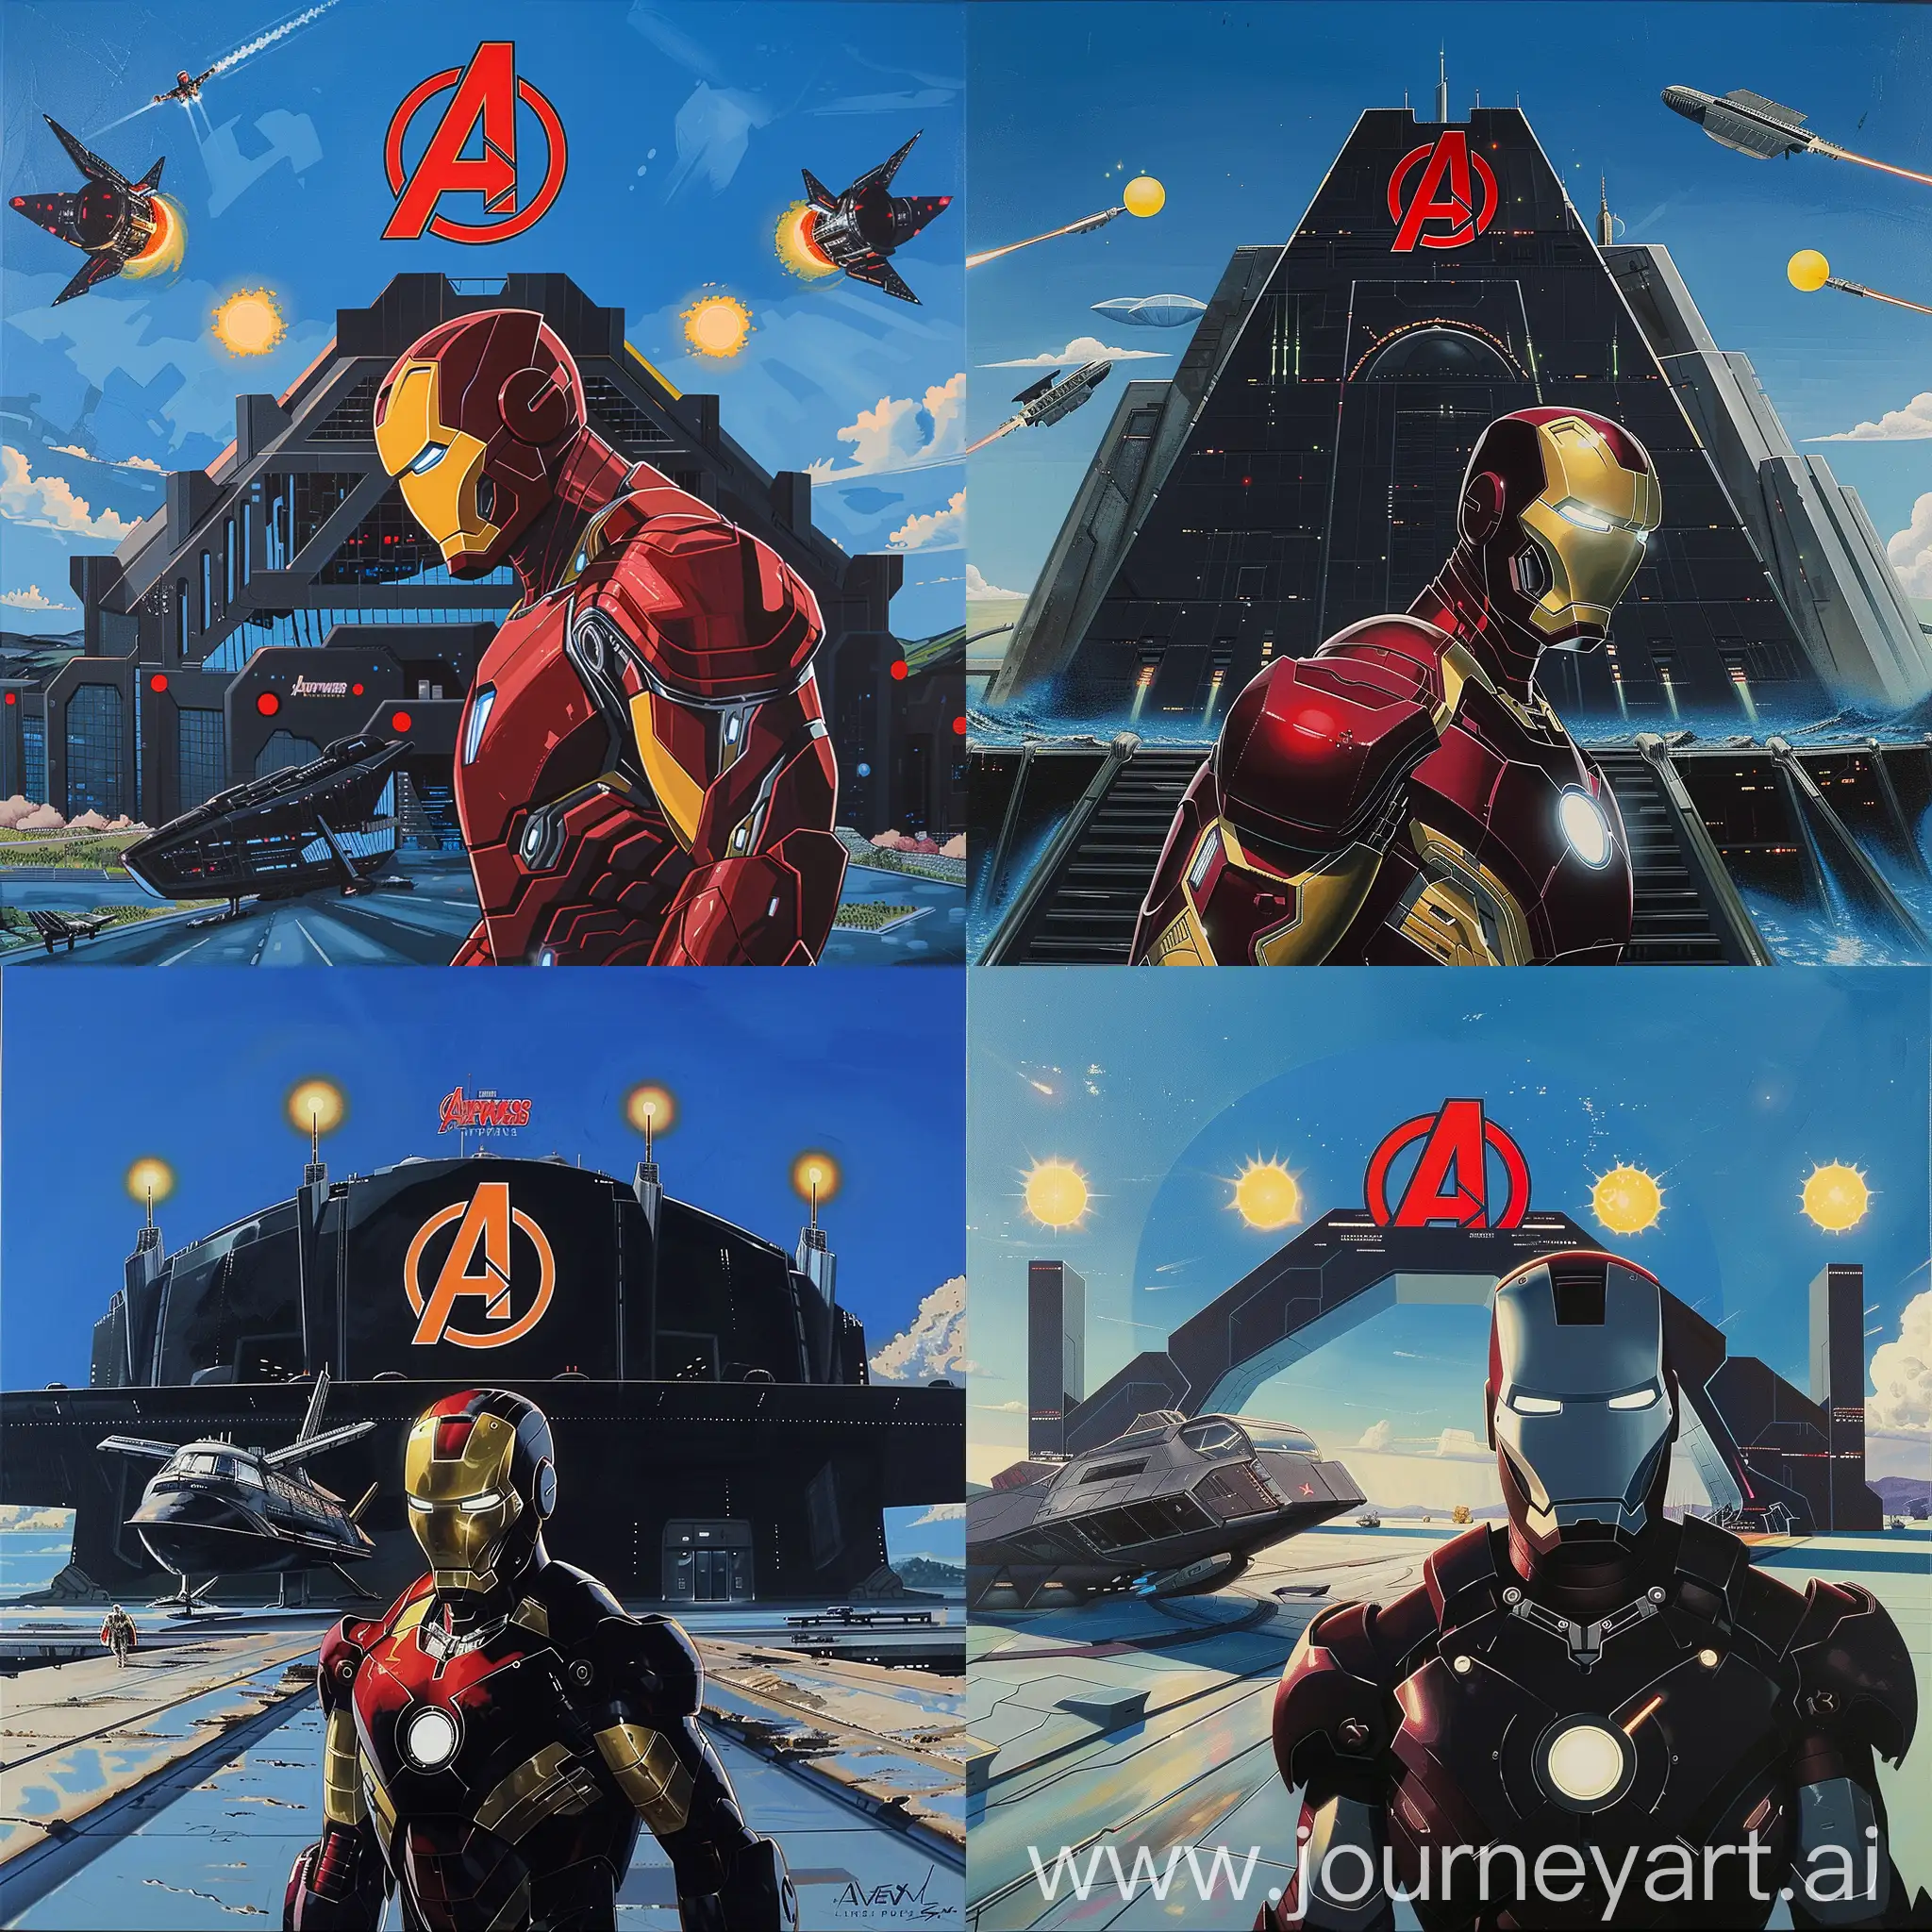 Historic painting style:

In the middle, there is a Iron Man.

Futuristic black steel Avenger Headquarters building complex far behind as background, a giant red logo of Avengers on the top of the Headquarters building complex.

Avengers steel spacecrafts and three small yellow suns in blue sky.